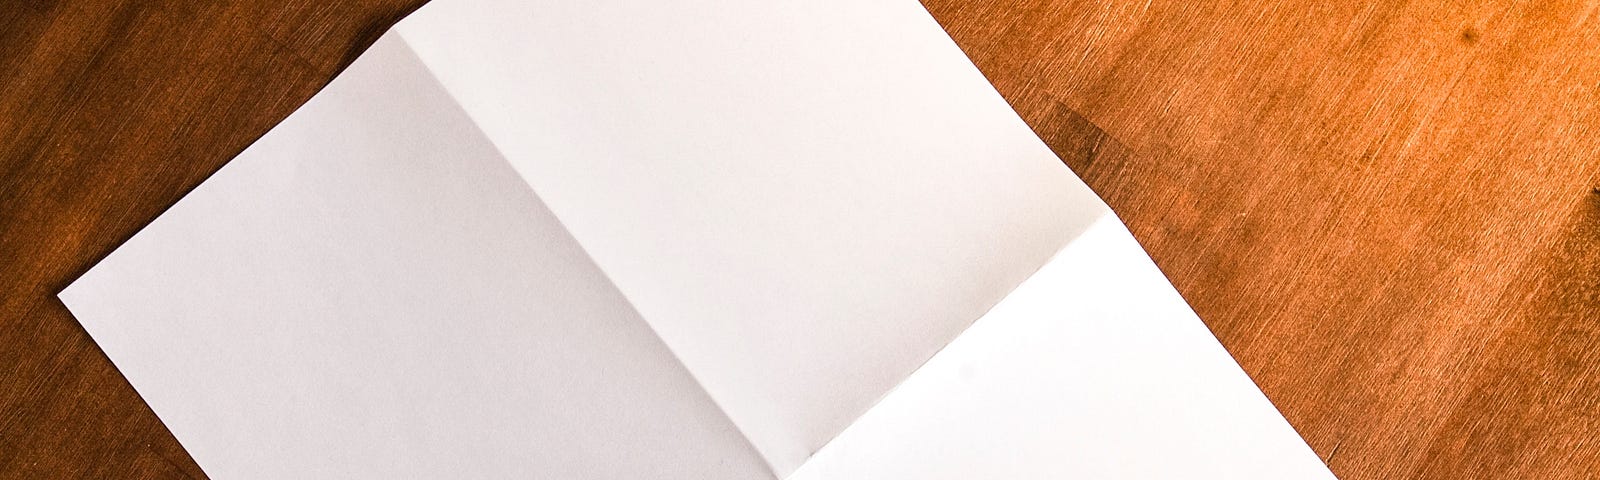 A blank piece of paper lying on a wood floor